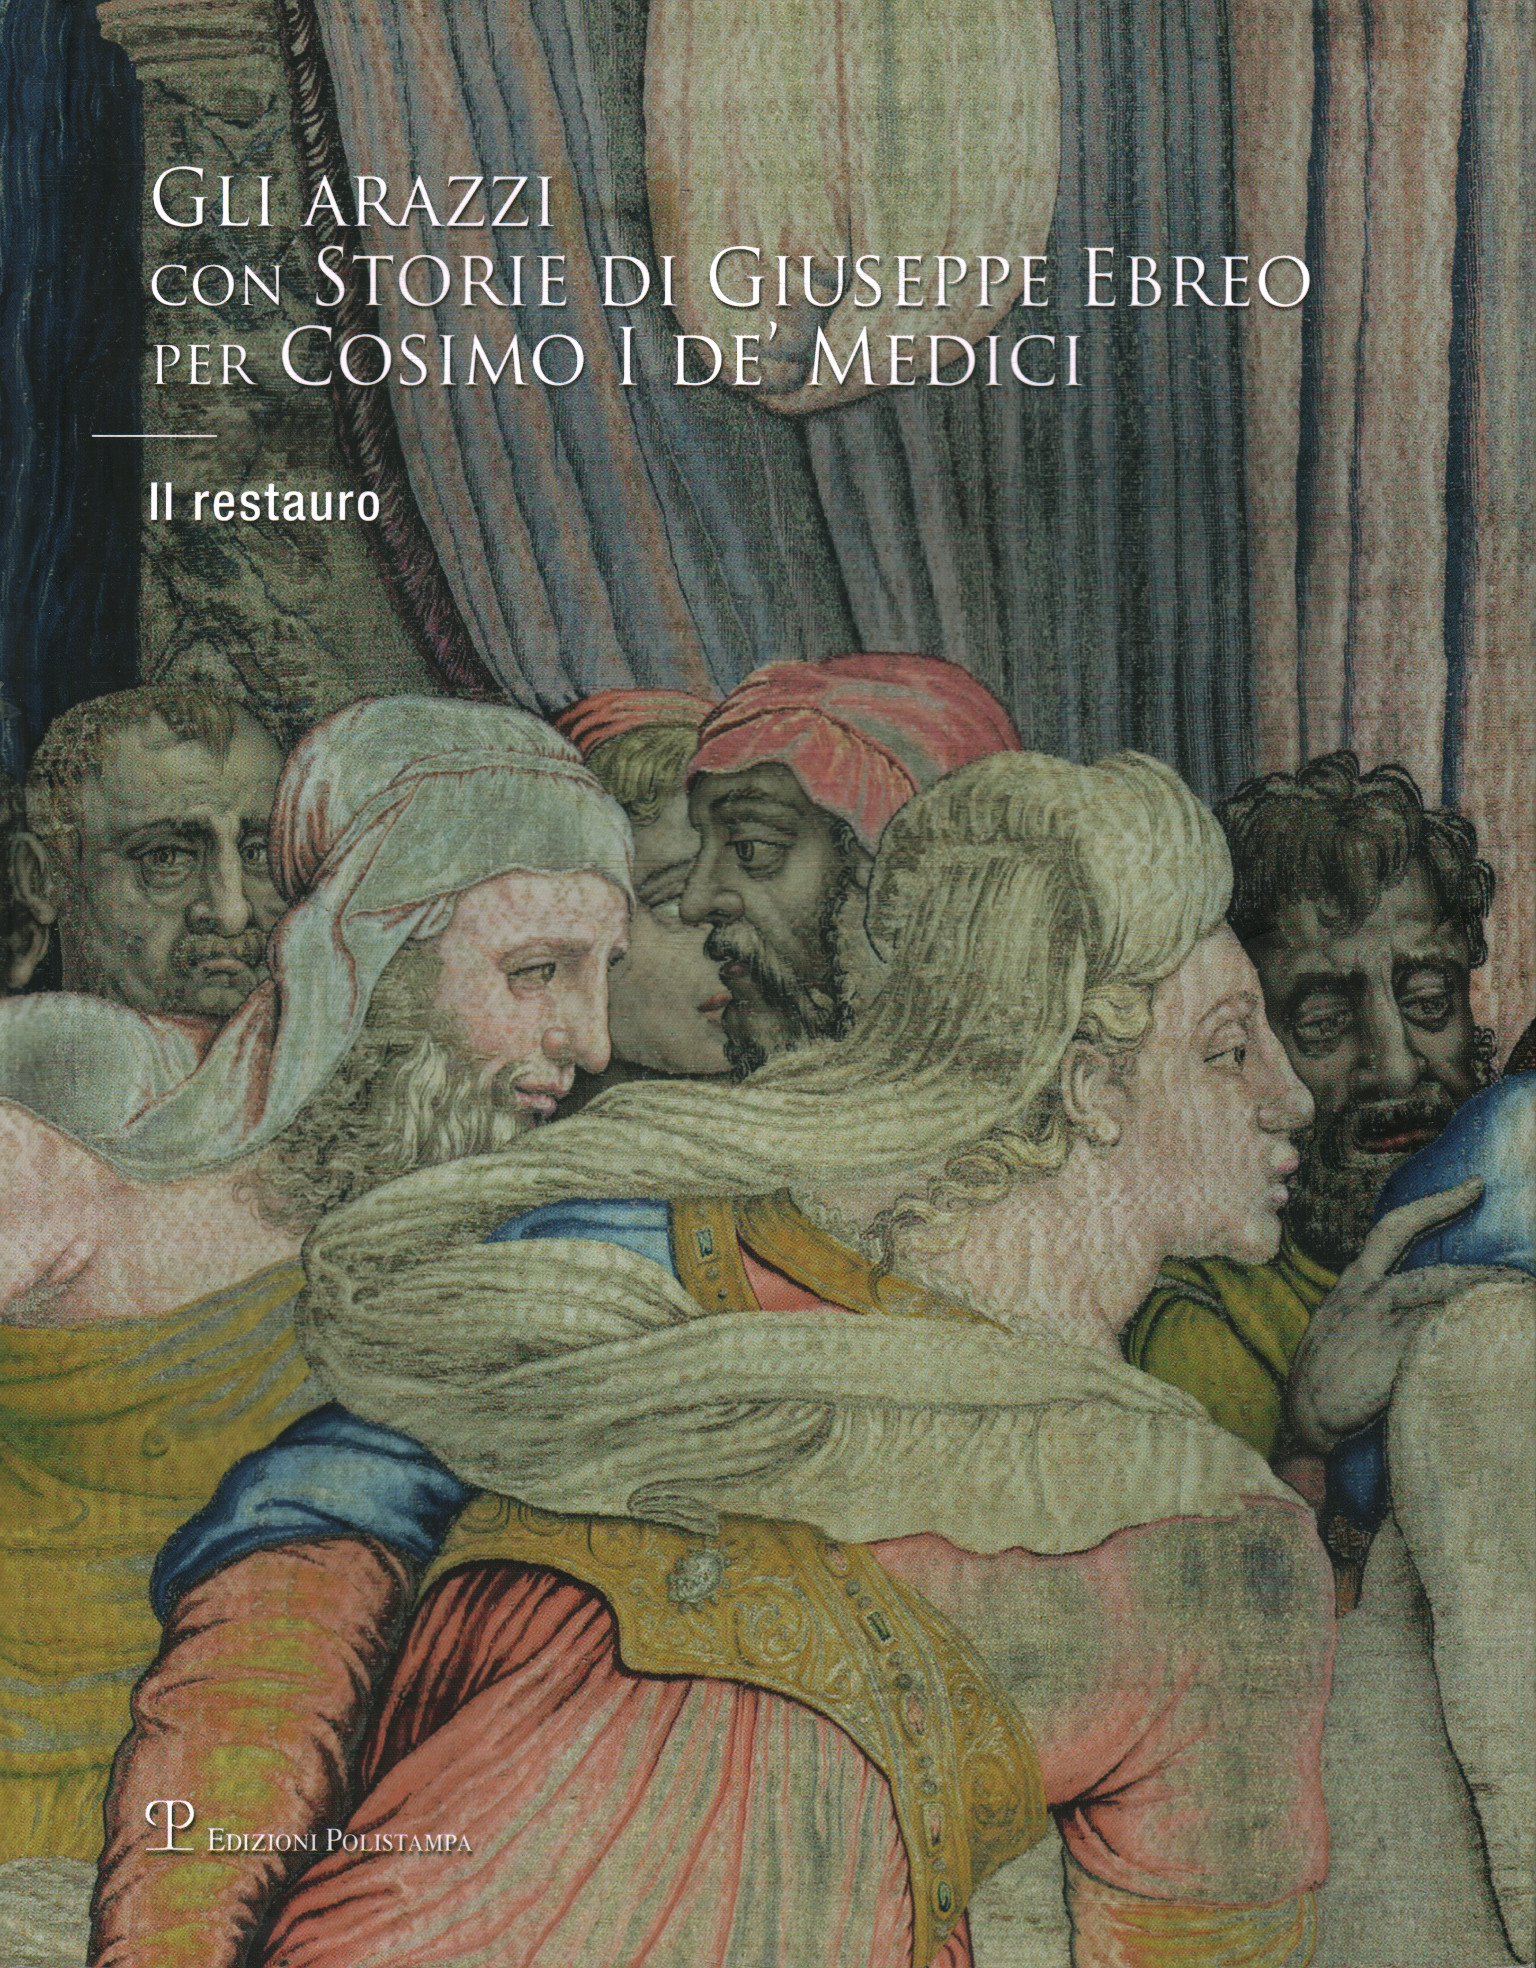 The tapestries with Stories of Joseph Ebre